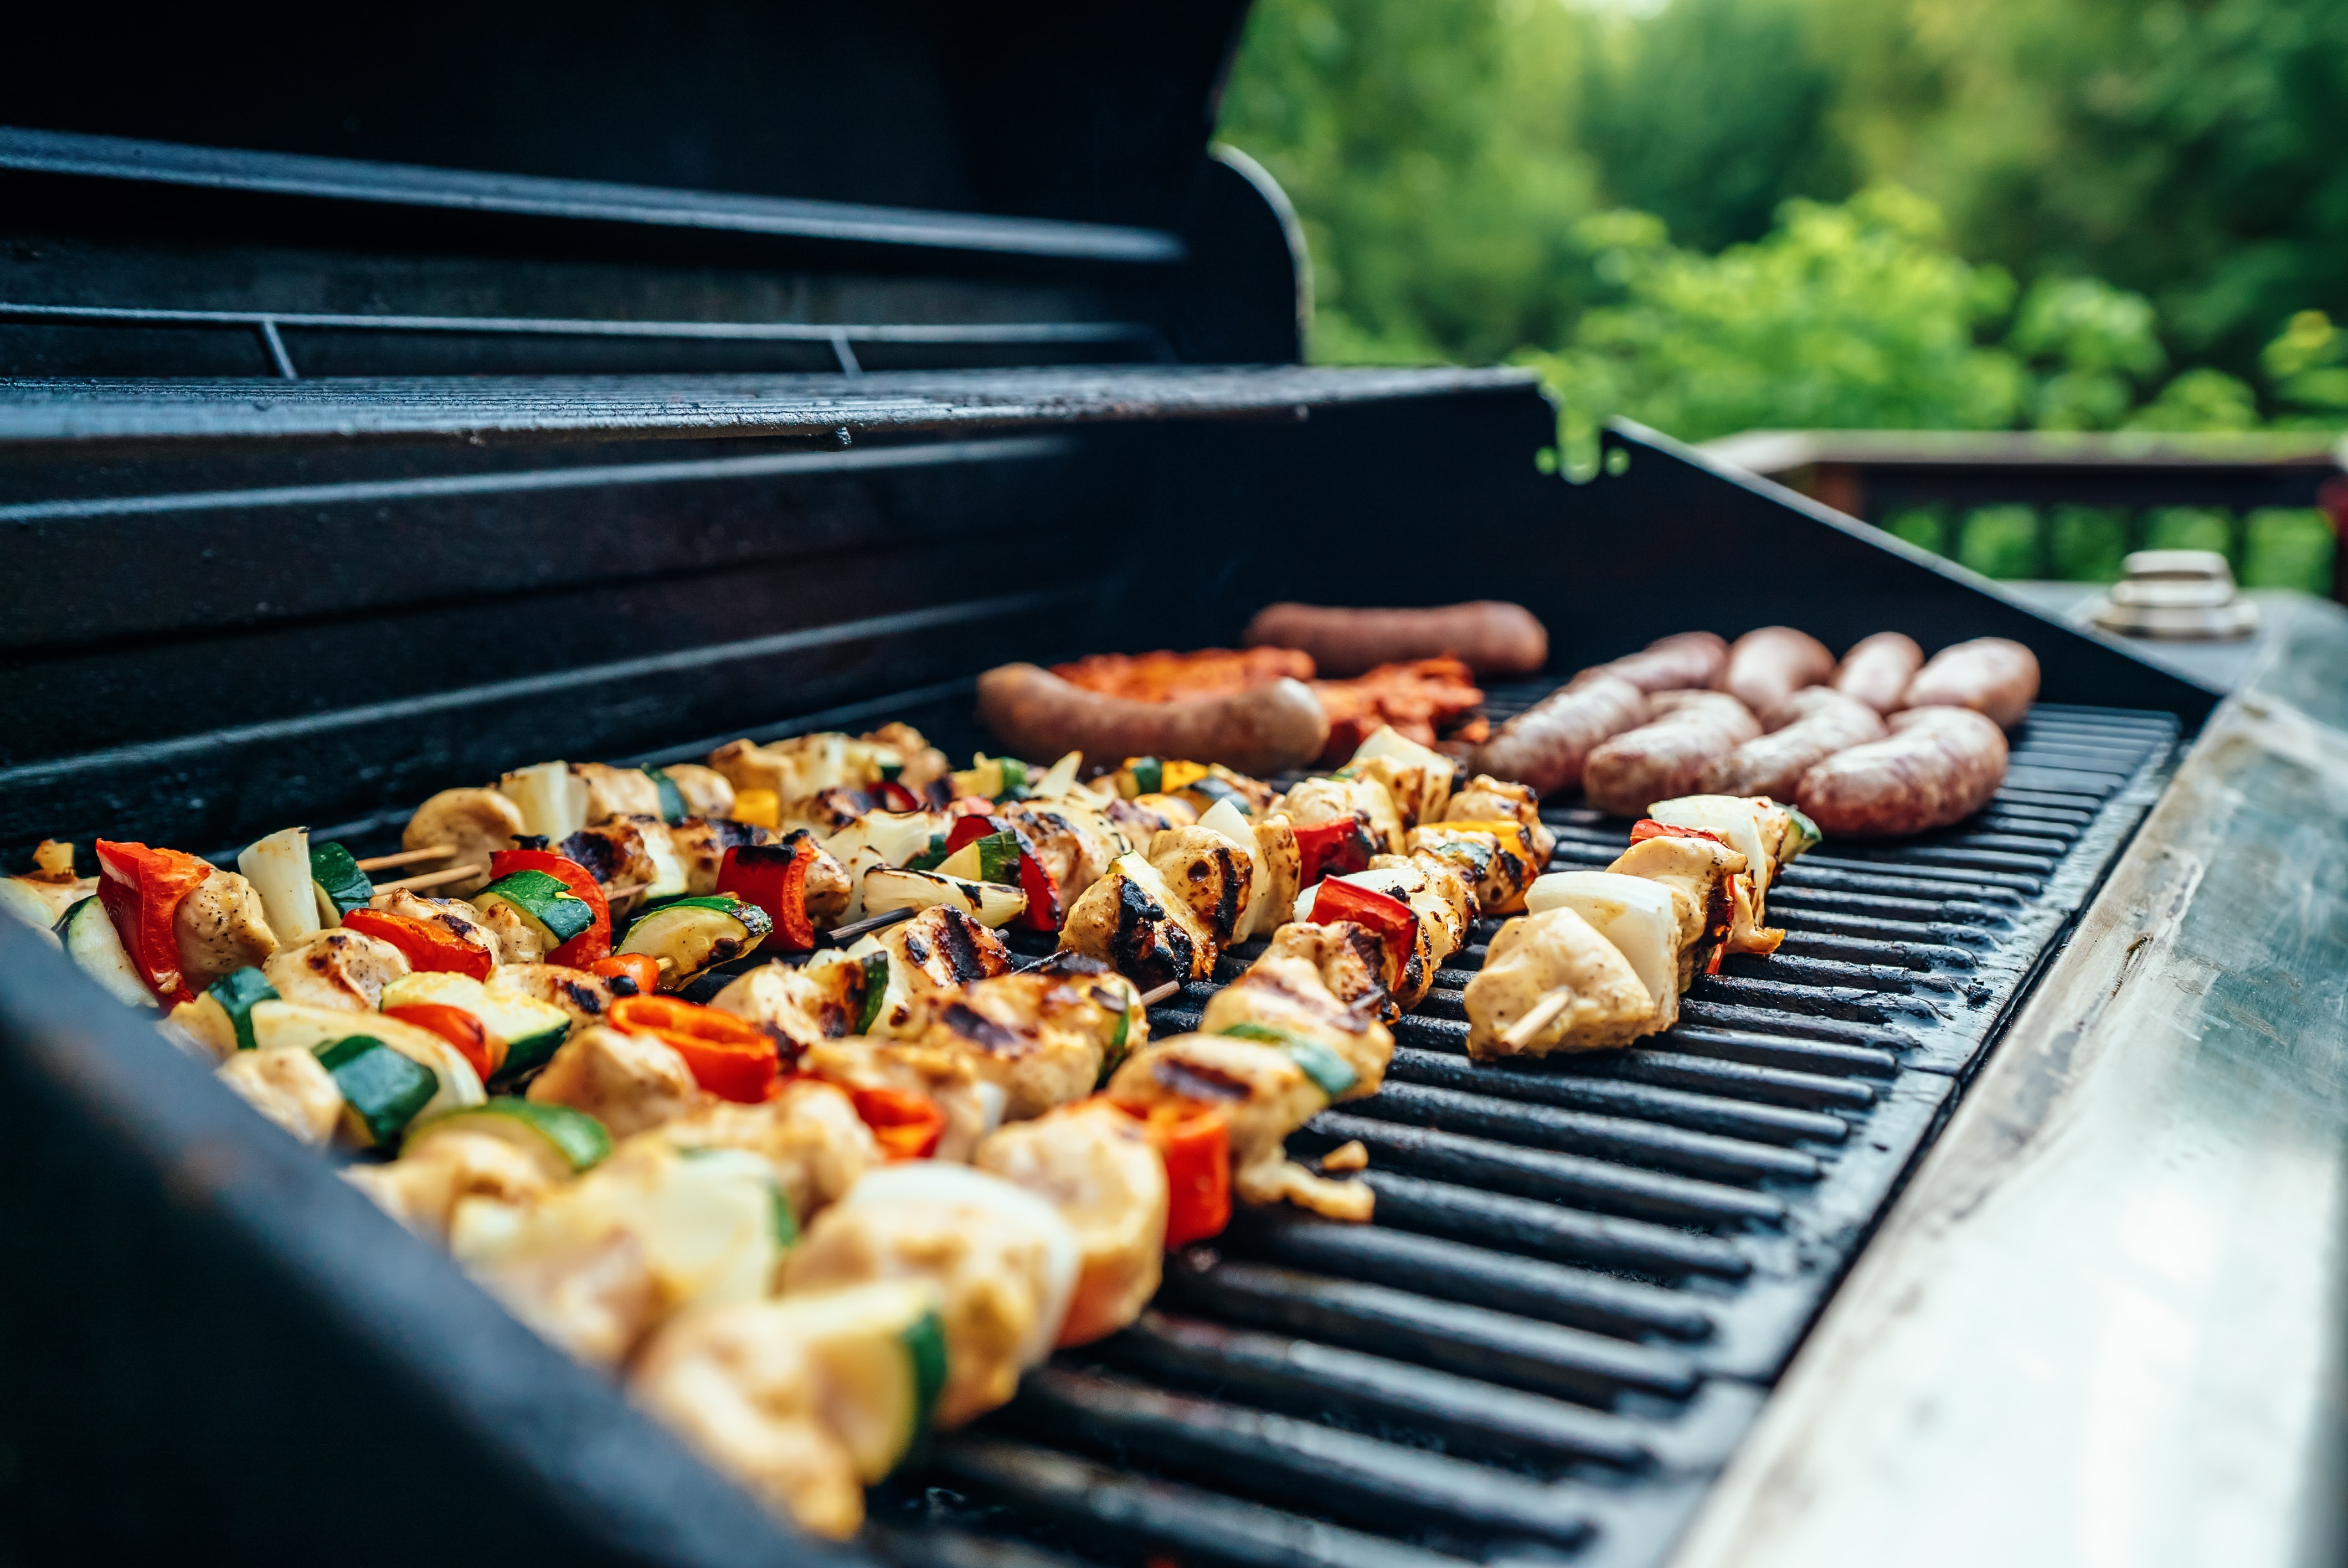 Charcoal vs. Gas Grilling: Which Is Healthier?